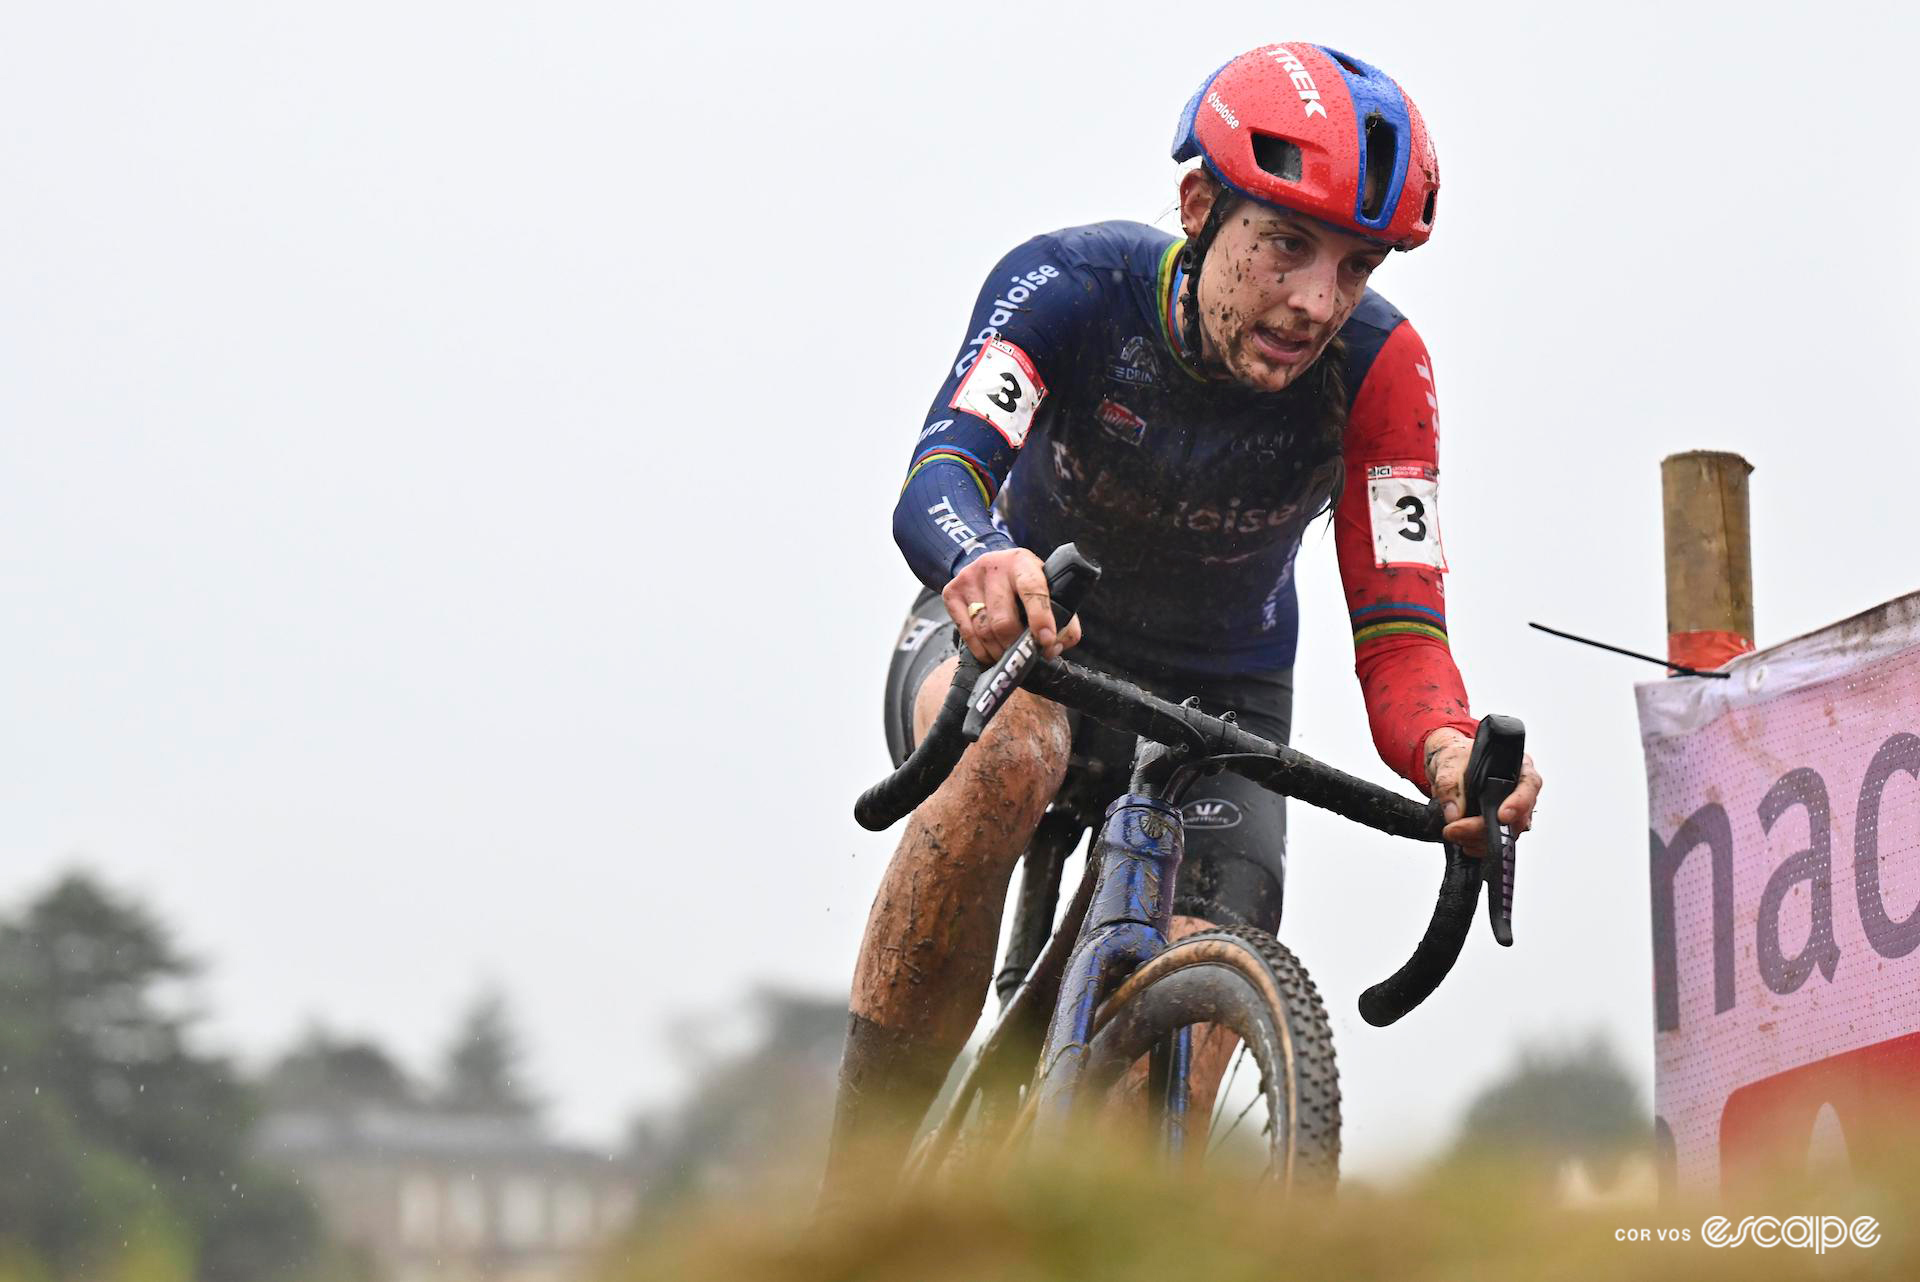 Former world champion Lucinda Brand of Baloise Trek Lions takes a corner during CX World Cup Dublin, her legs and kit splashed with mud, an overcast sky overhead.